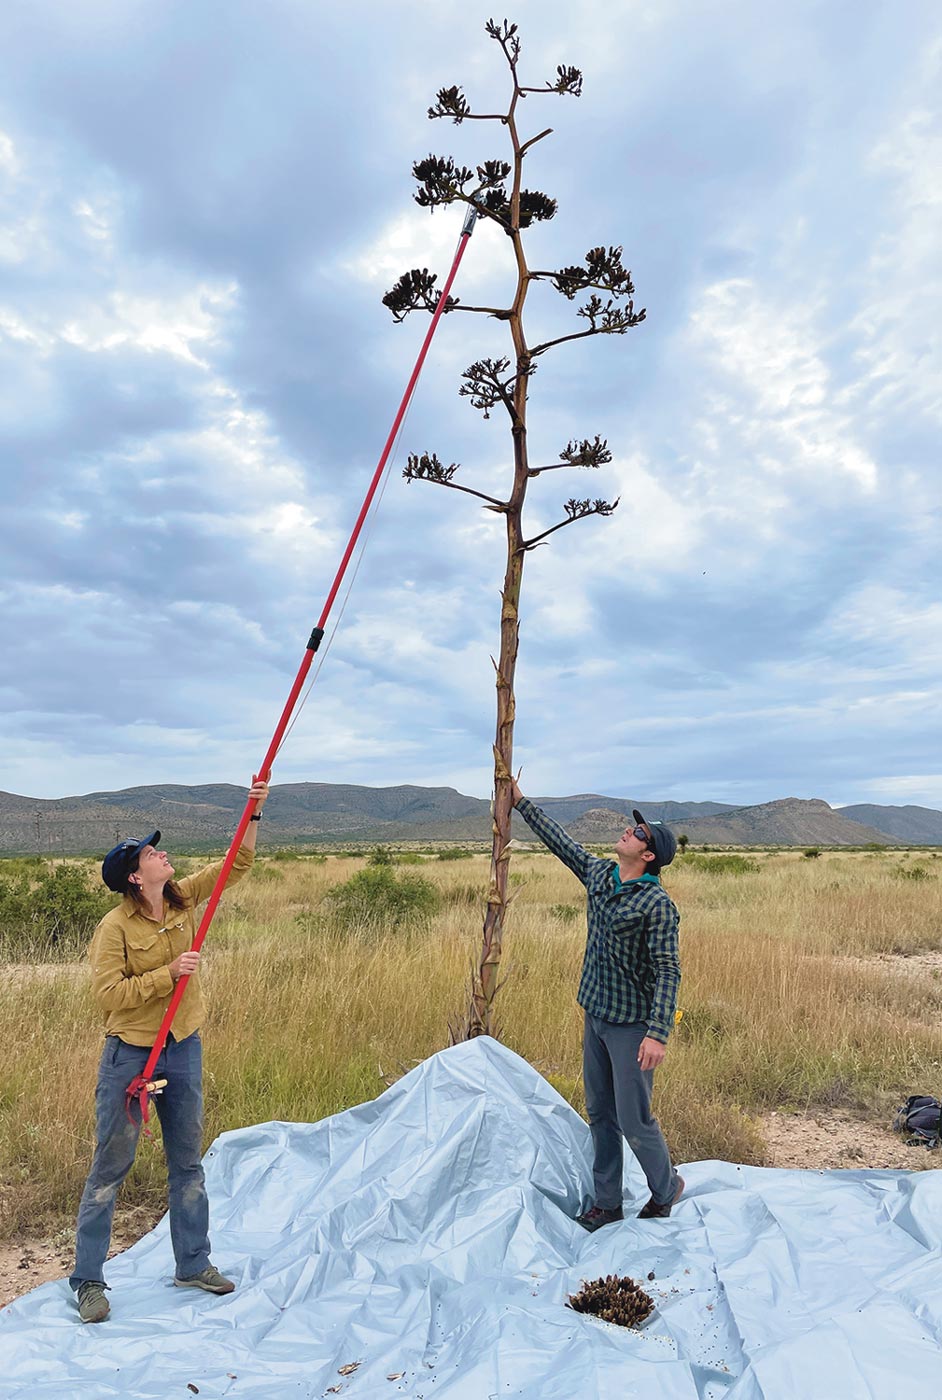 BCI staff using a long stick to collect agave seeds atop a tree at The Nature Conservancy Marathon Grasslands Preserve